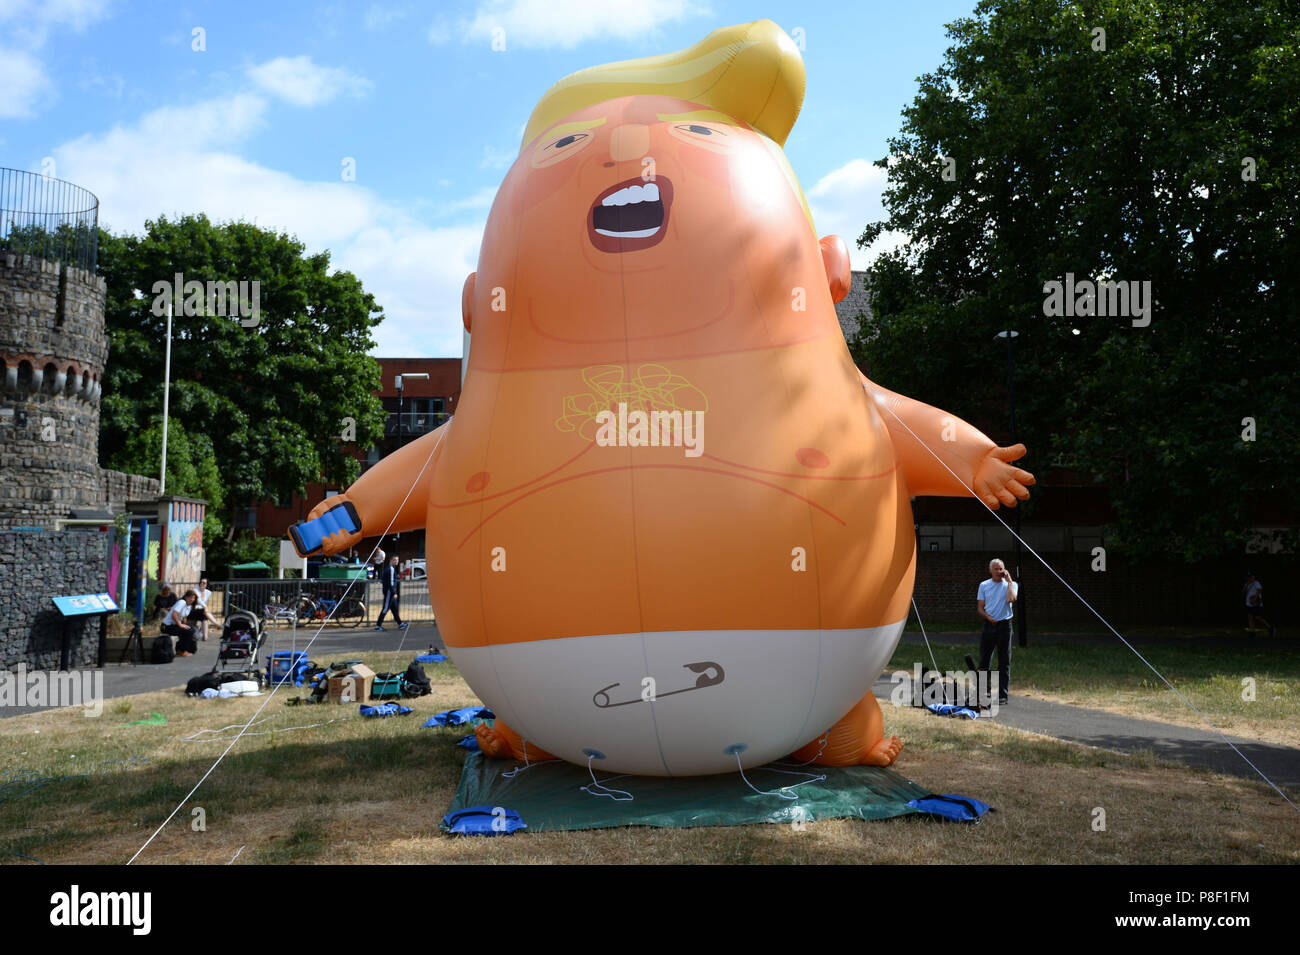 The Trump Baby Blimp is inflated during a practice test, at Bingfield Park in north London. Stock Photo